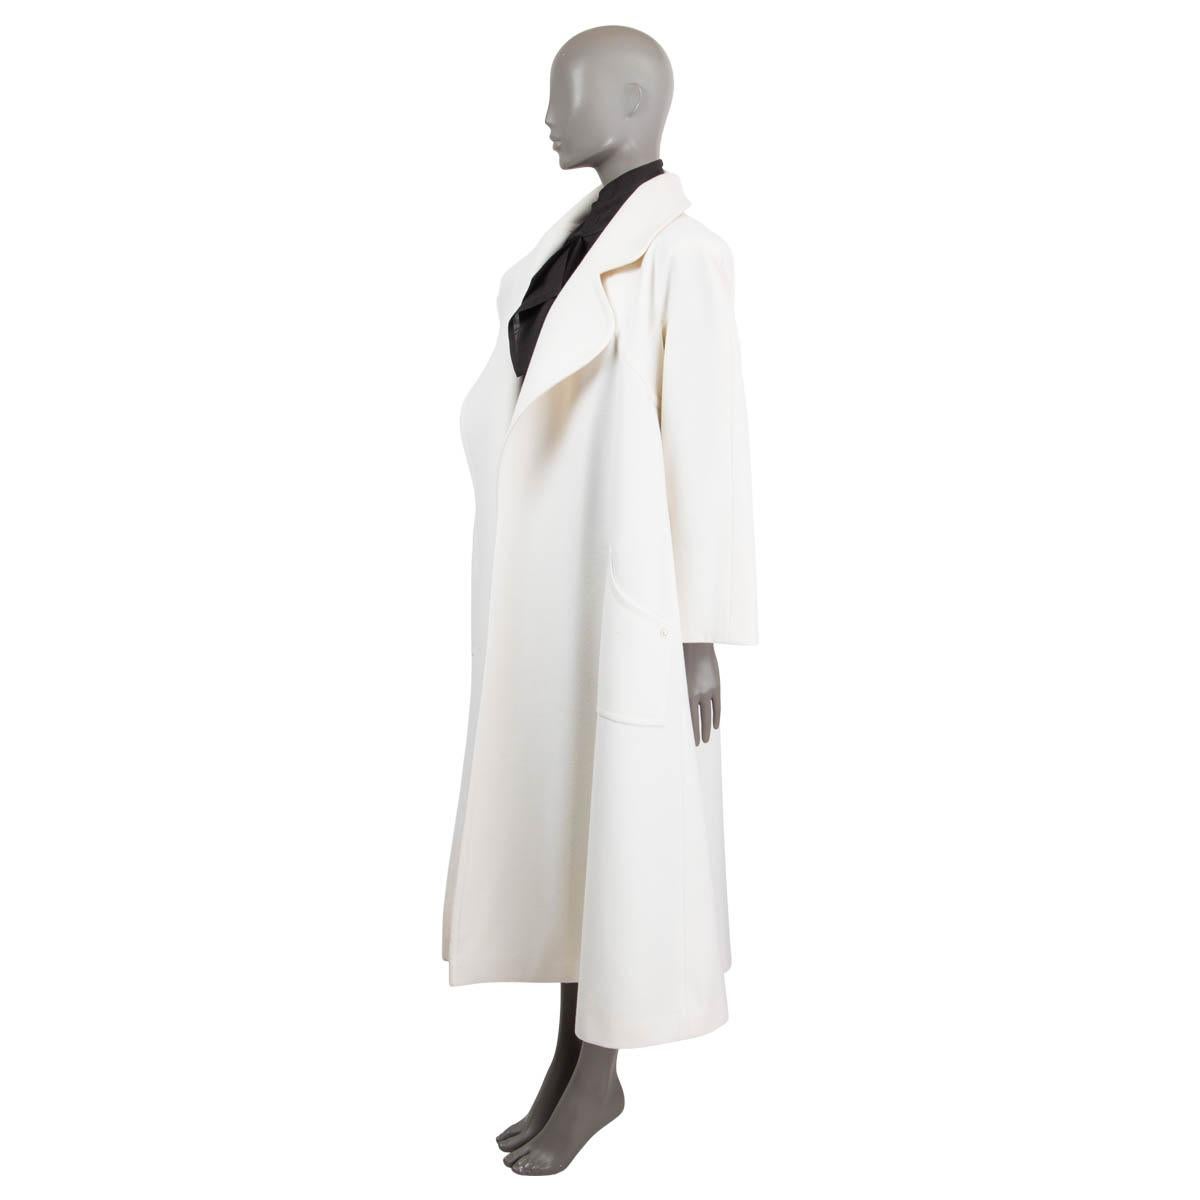 100% authentic Chanel 2017 open oversized coat in off-white wool (75%) and cashmere (25%). Features a wide collar, two patch pockets on the front and long raglan sleeves (sleeve measurements taken from the neck). Sleeves and bust lined in off-white